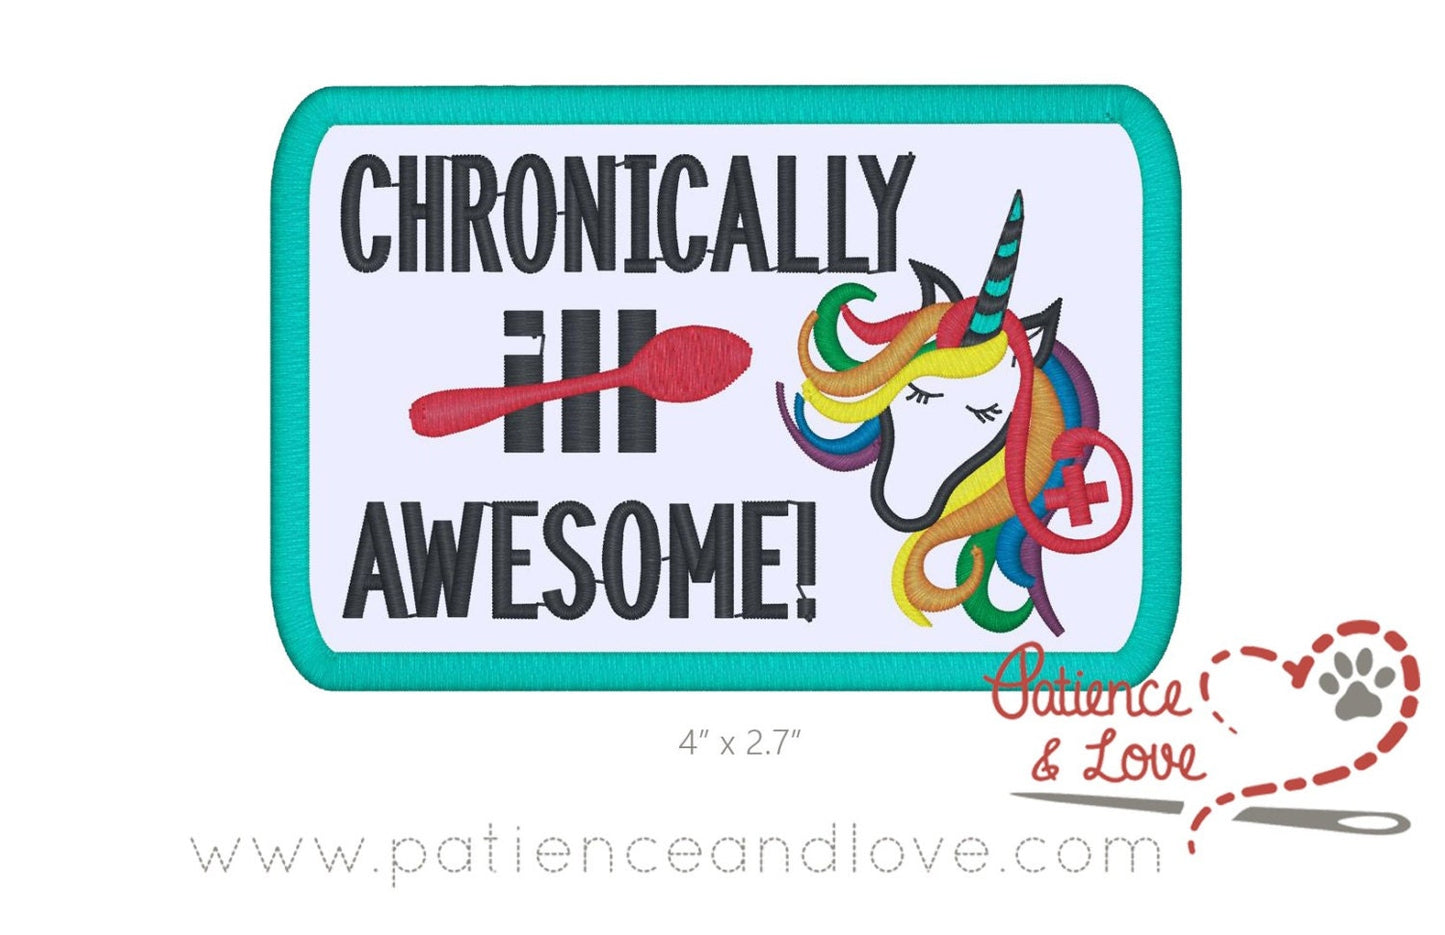 Chronically awesome, medical rainbow unicorn and ill crossed out with a spoon, 4x2.7 inch rectangle patch